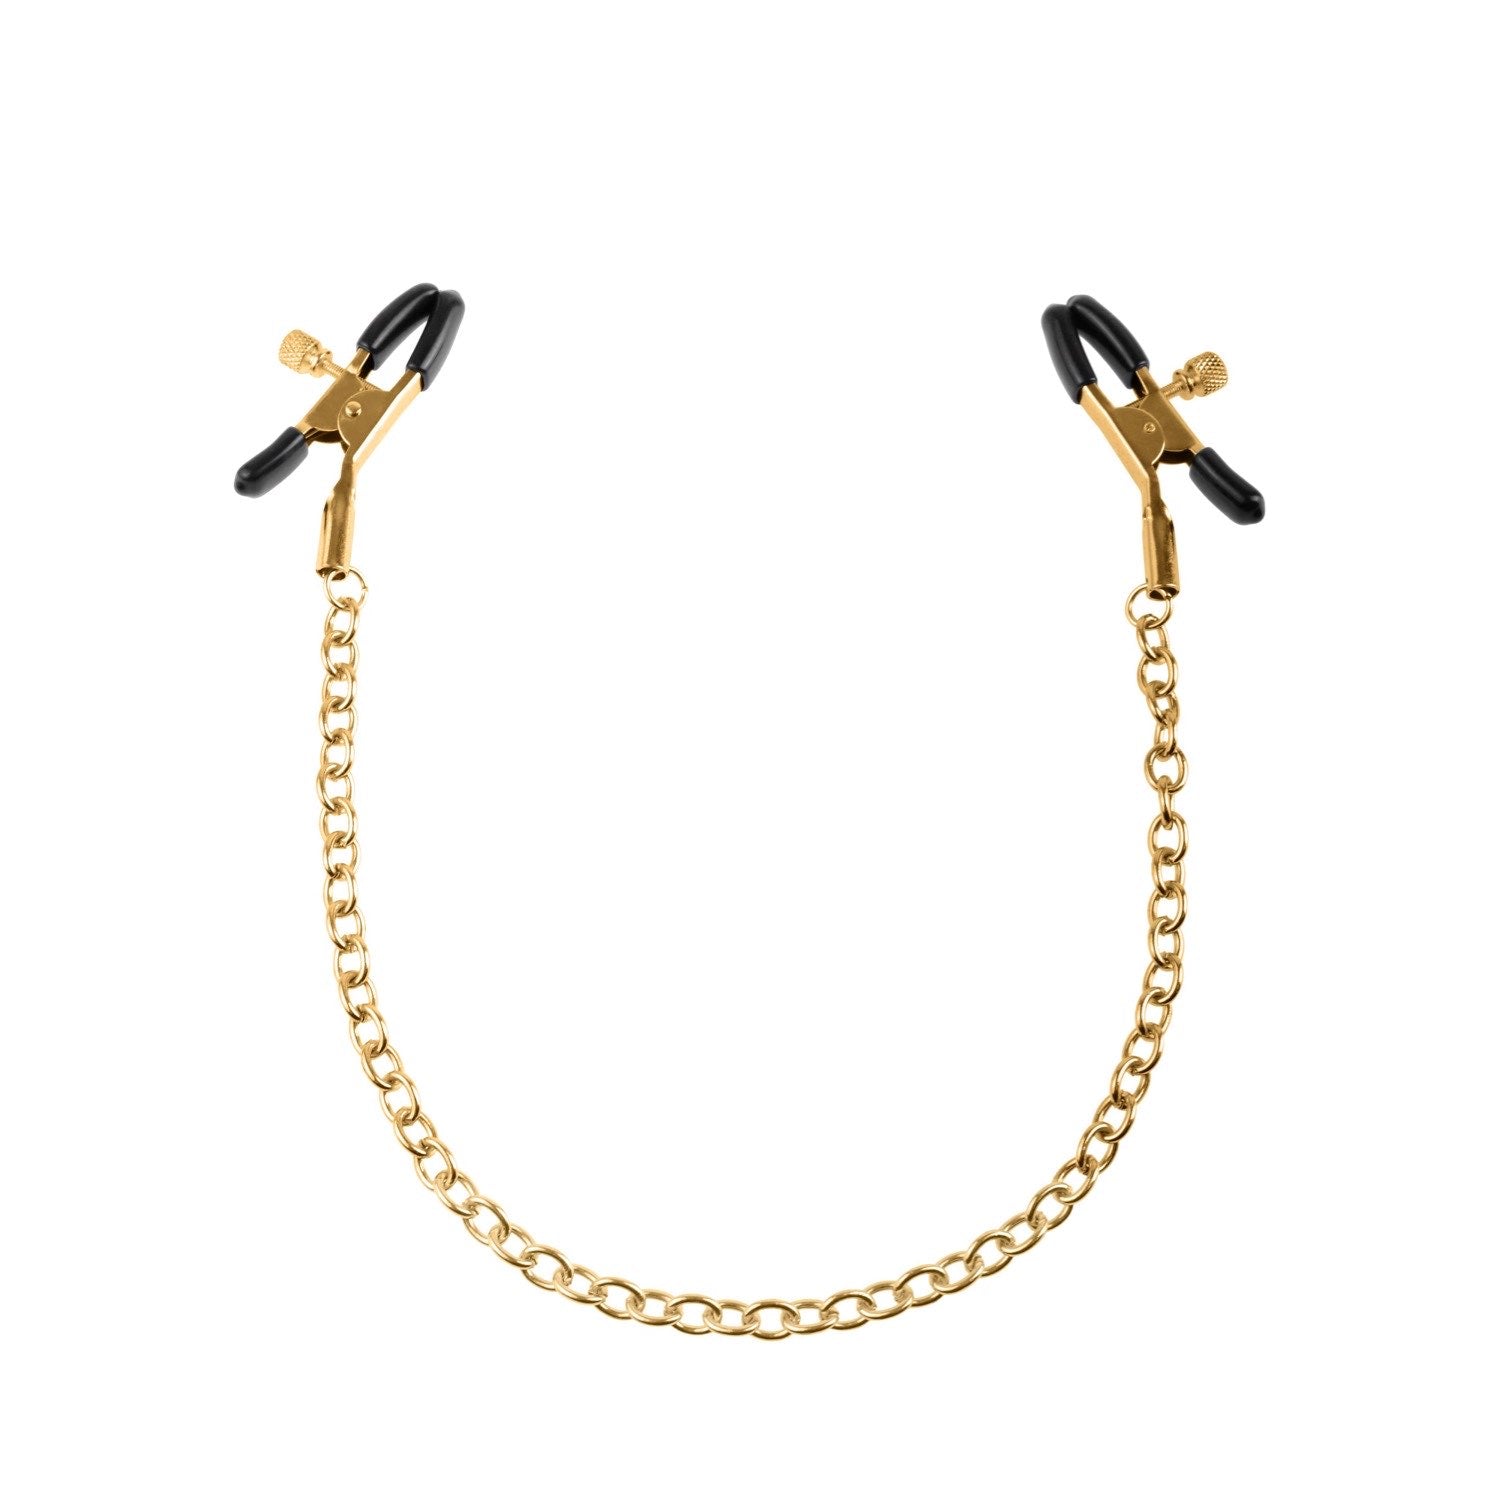 Fetish Fantasy Gold Chain Nipple Clamps - Gold Nipple Clamps with Chain by Pipedream